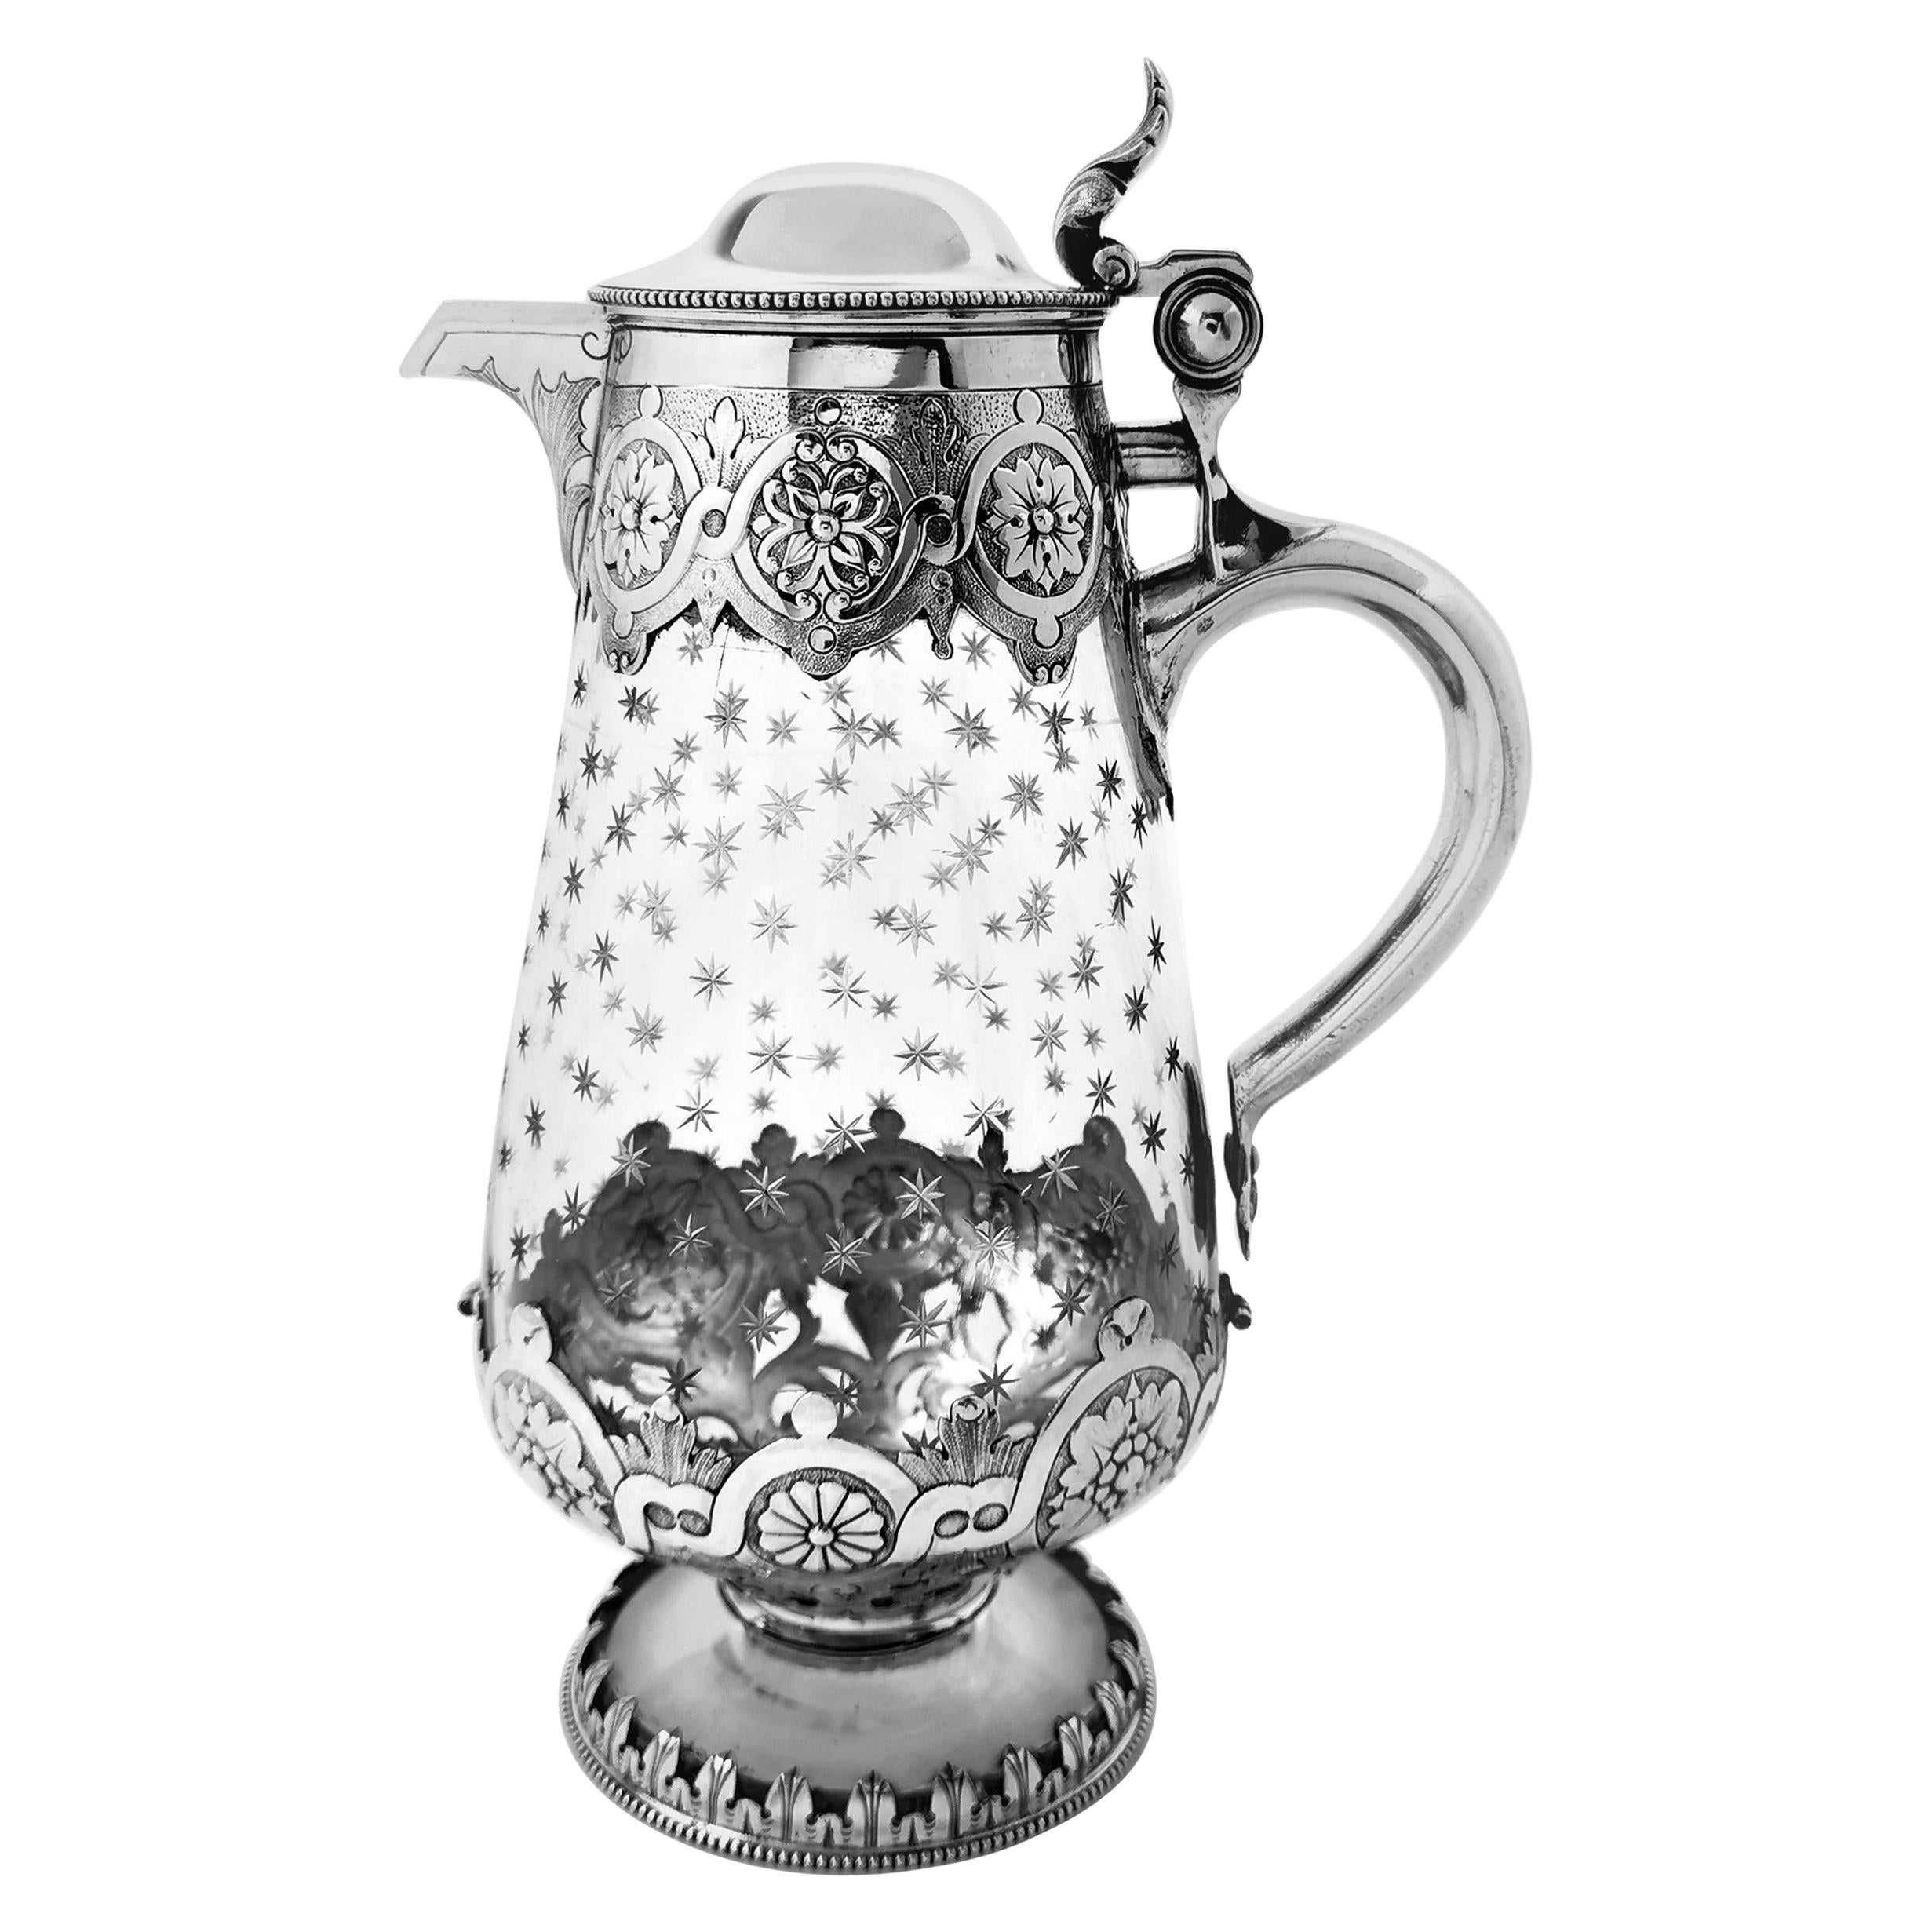 Antique Victorian Sterling Silver and Cut Glass Claret Jug / Wine Decanter, 1881